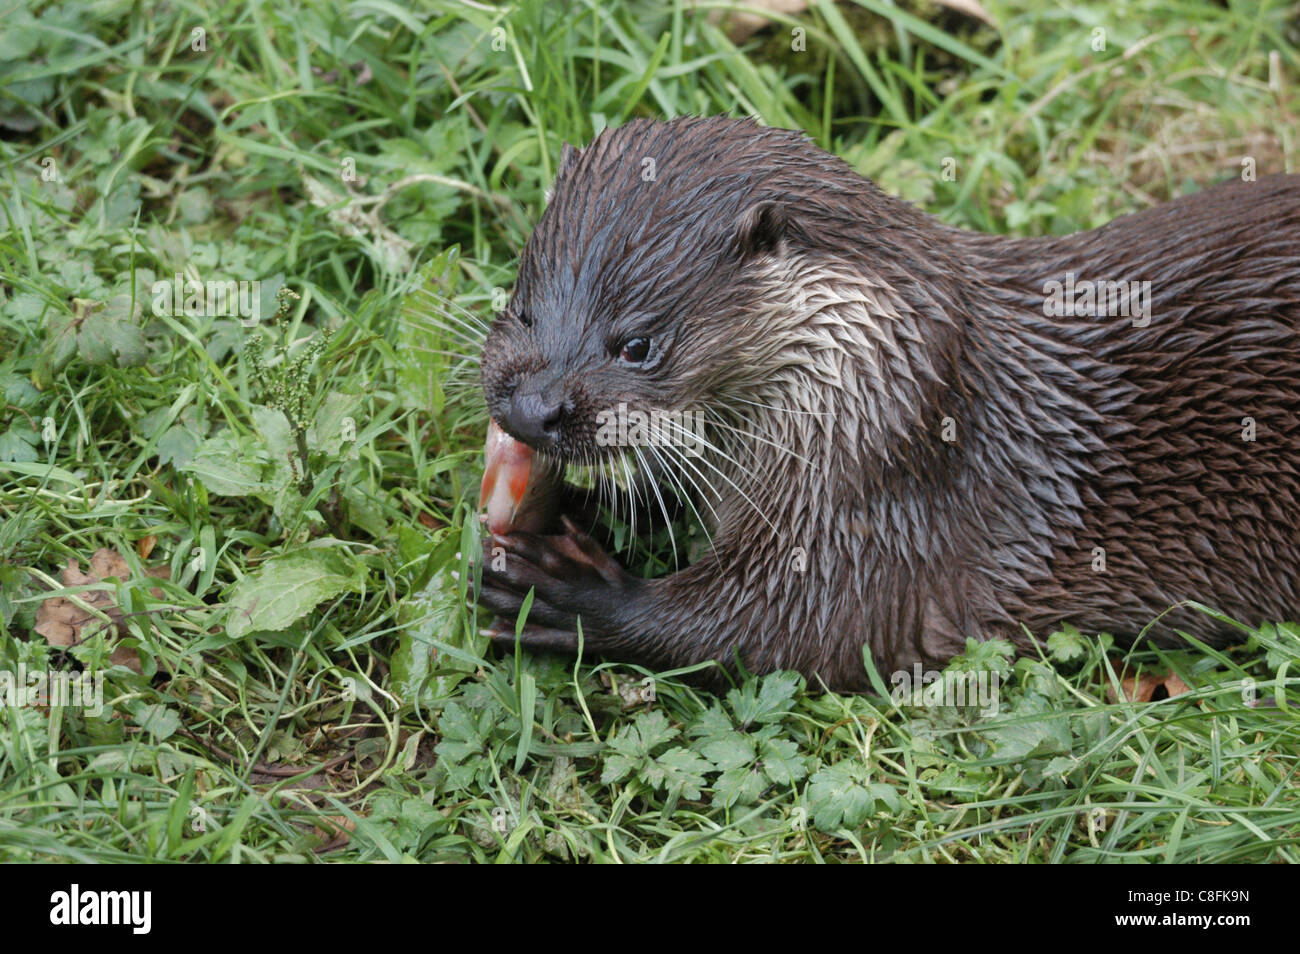 British or European Otter, making a come back to British coasts, estuaries and fresh water habitats with suitable cover. Stock Photo